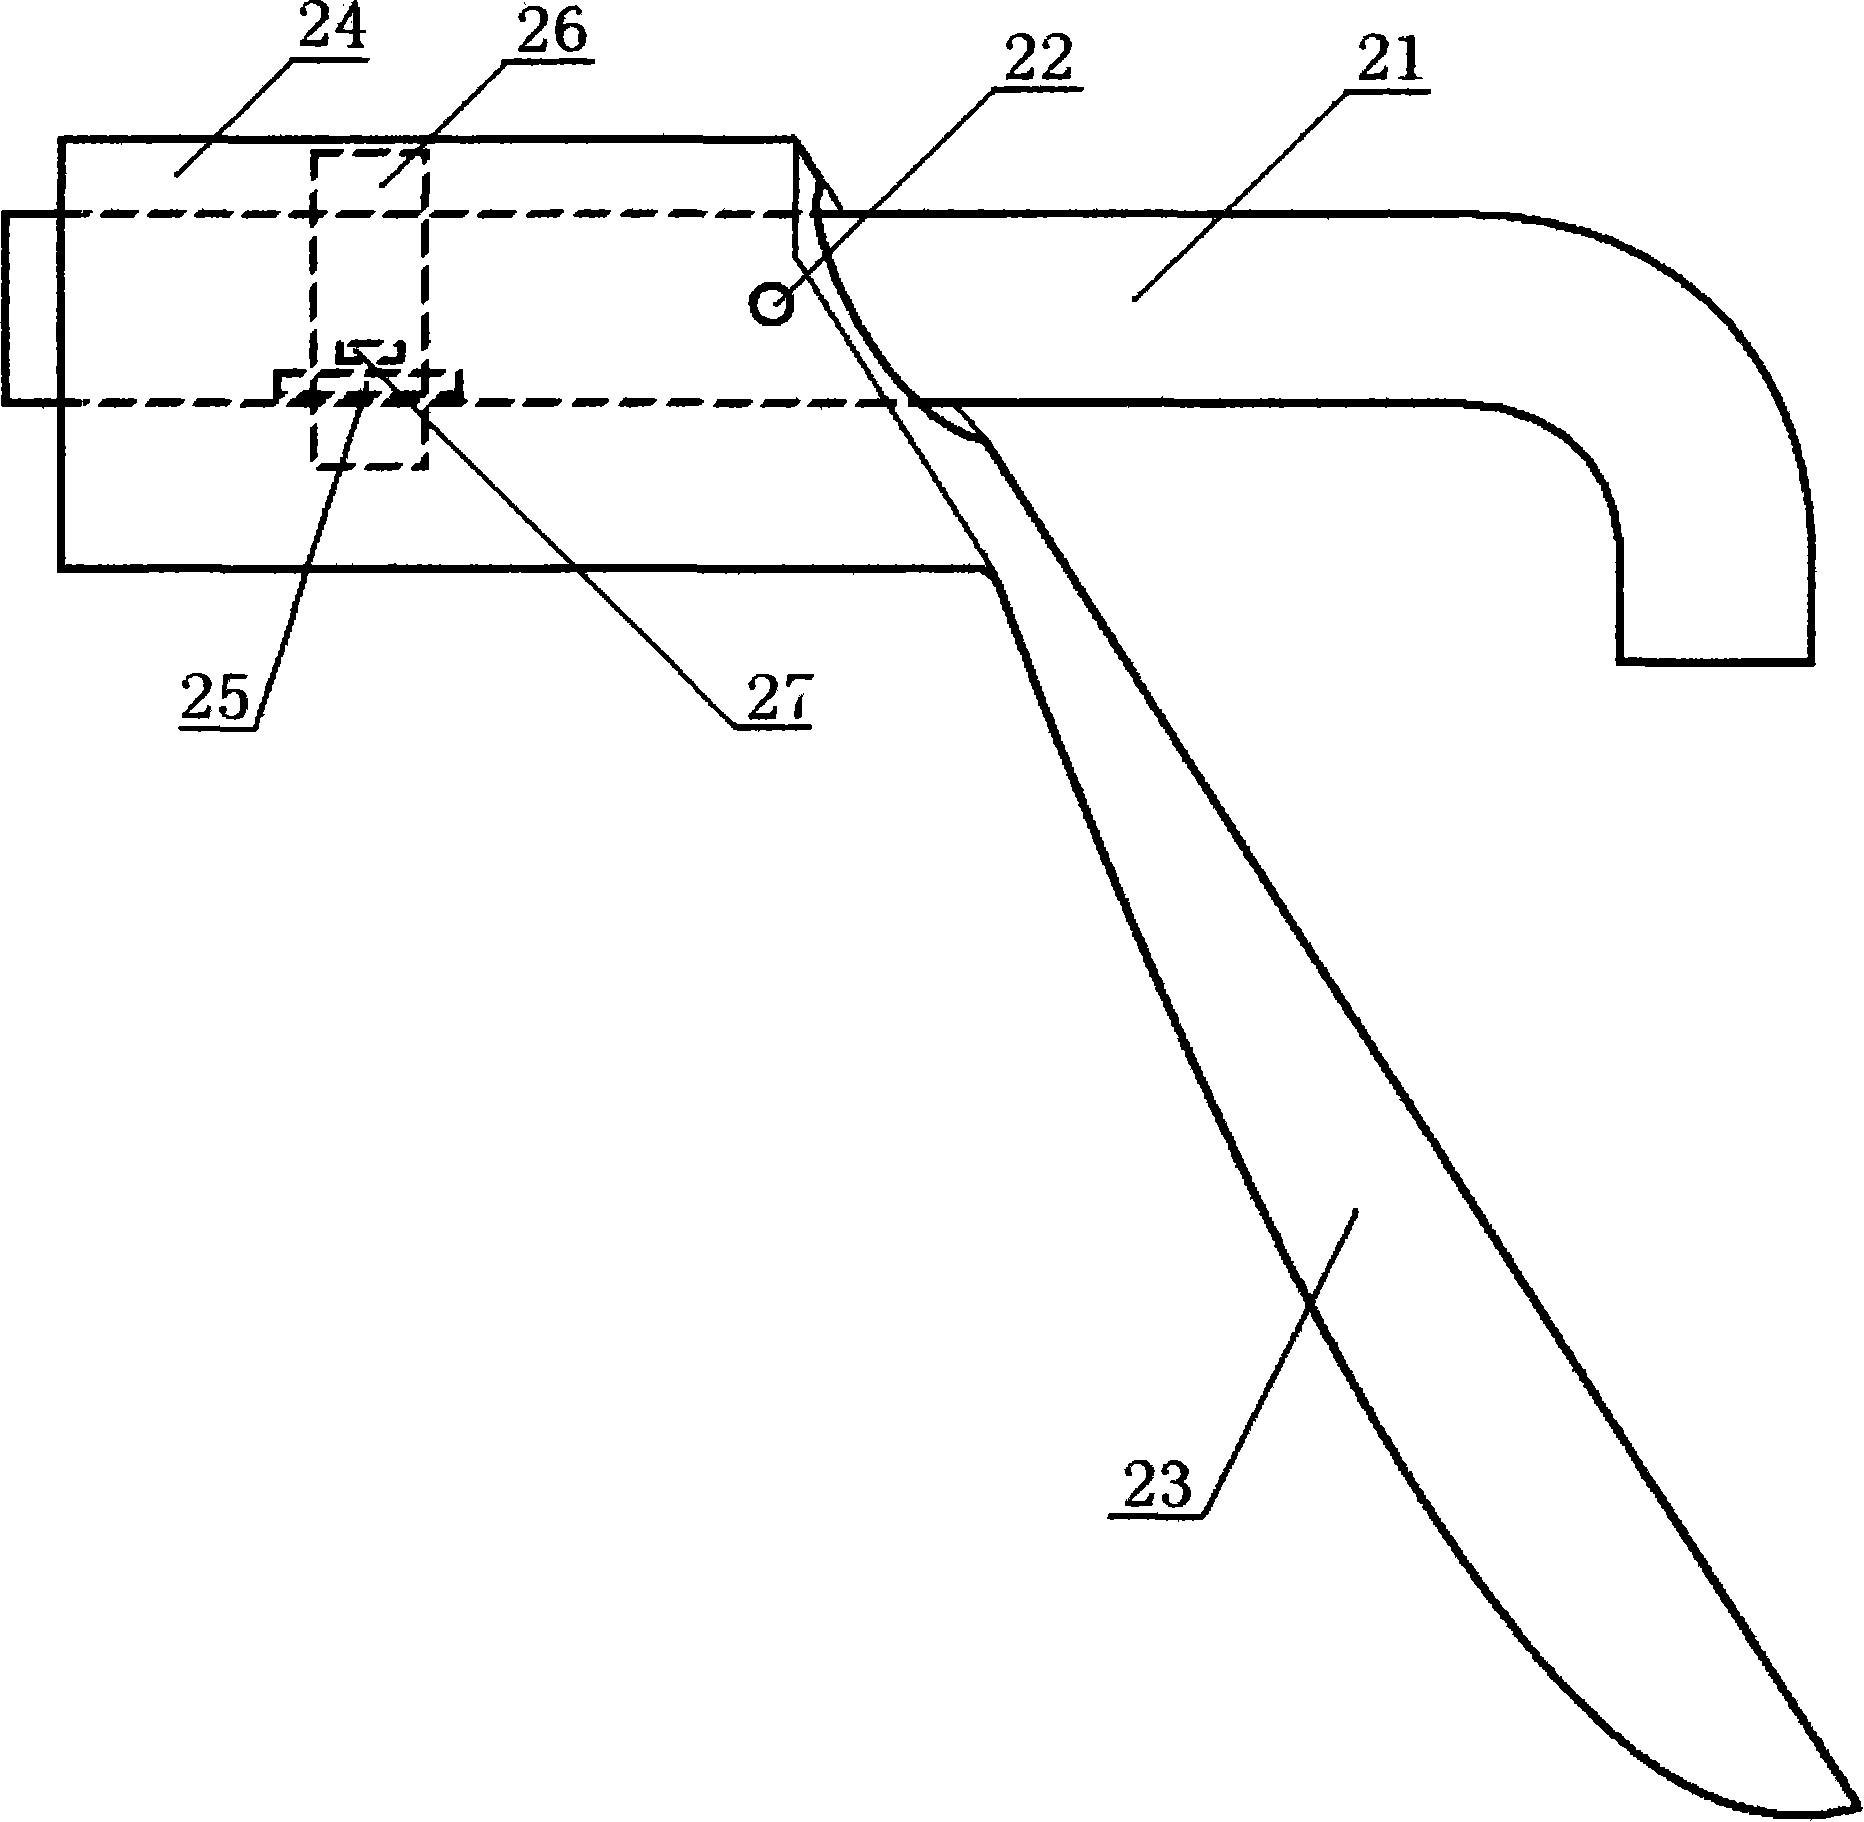 Normal closed valve core and switch control device